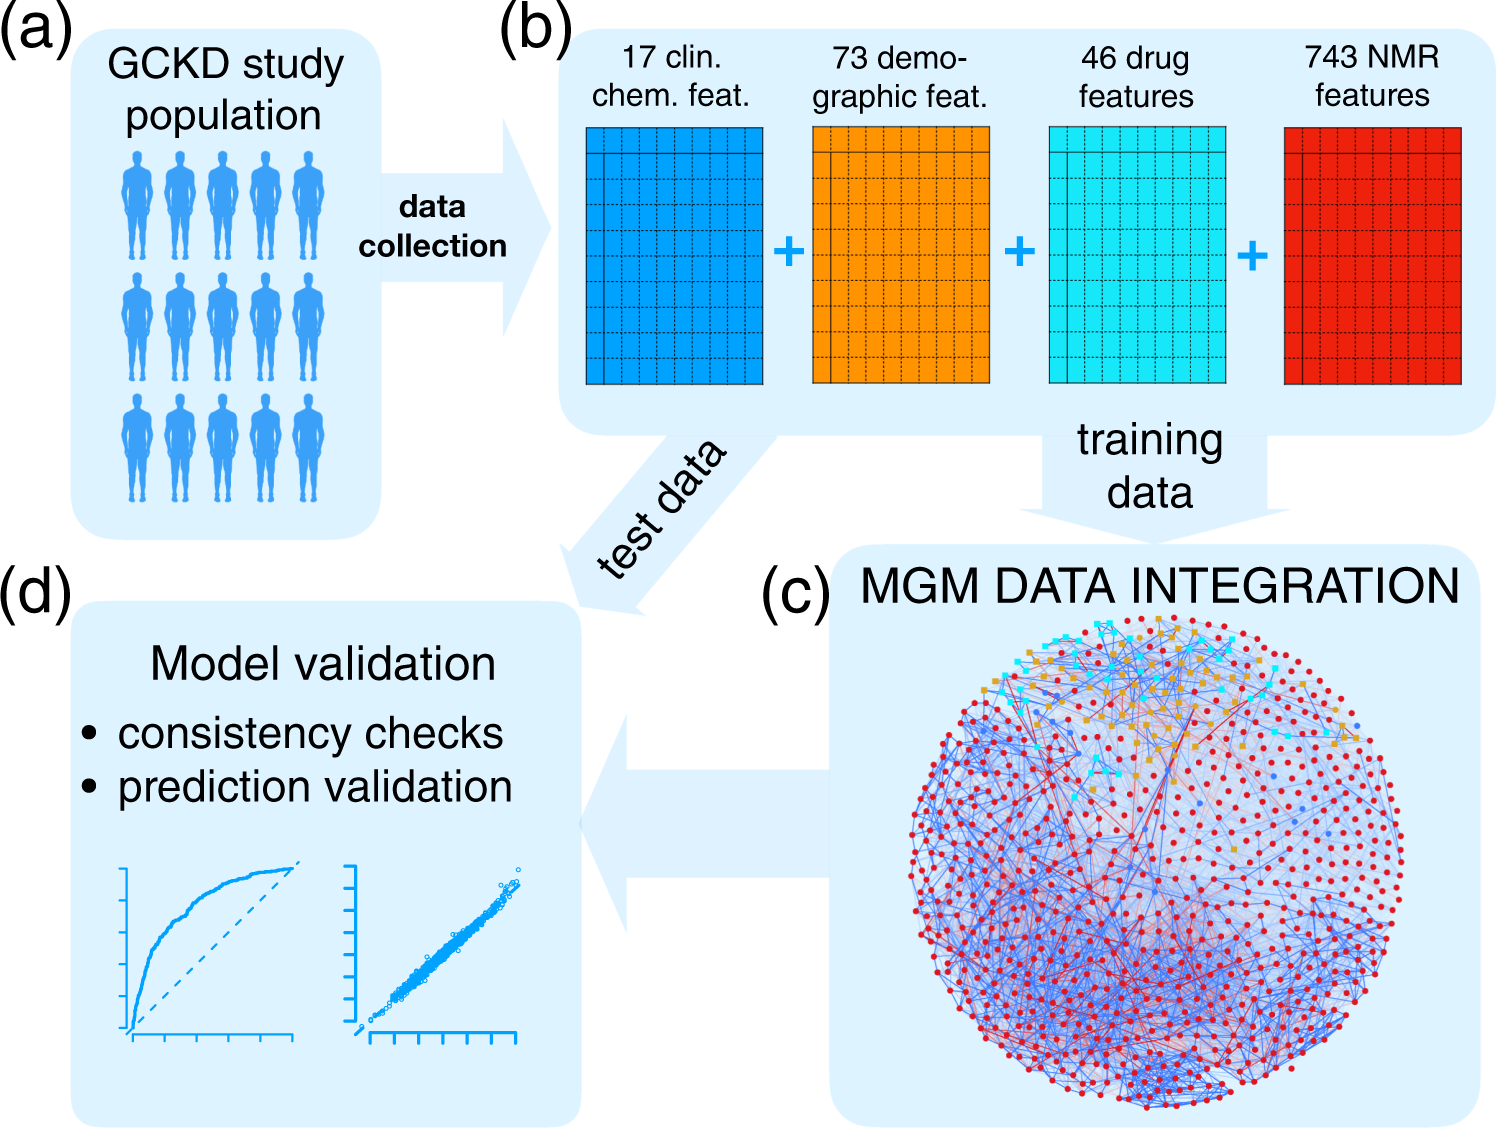 Integrating Retinal Variables into Graph Visualizing Multivariate